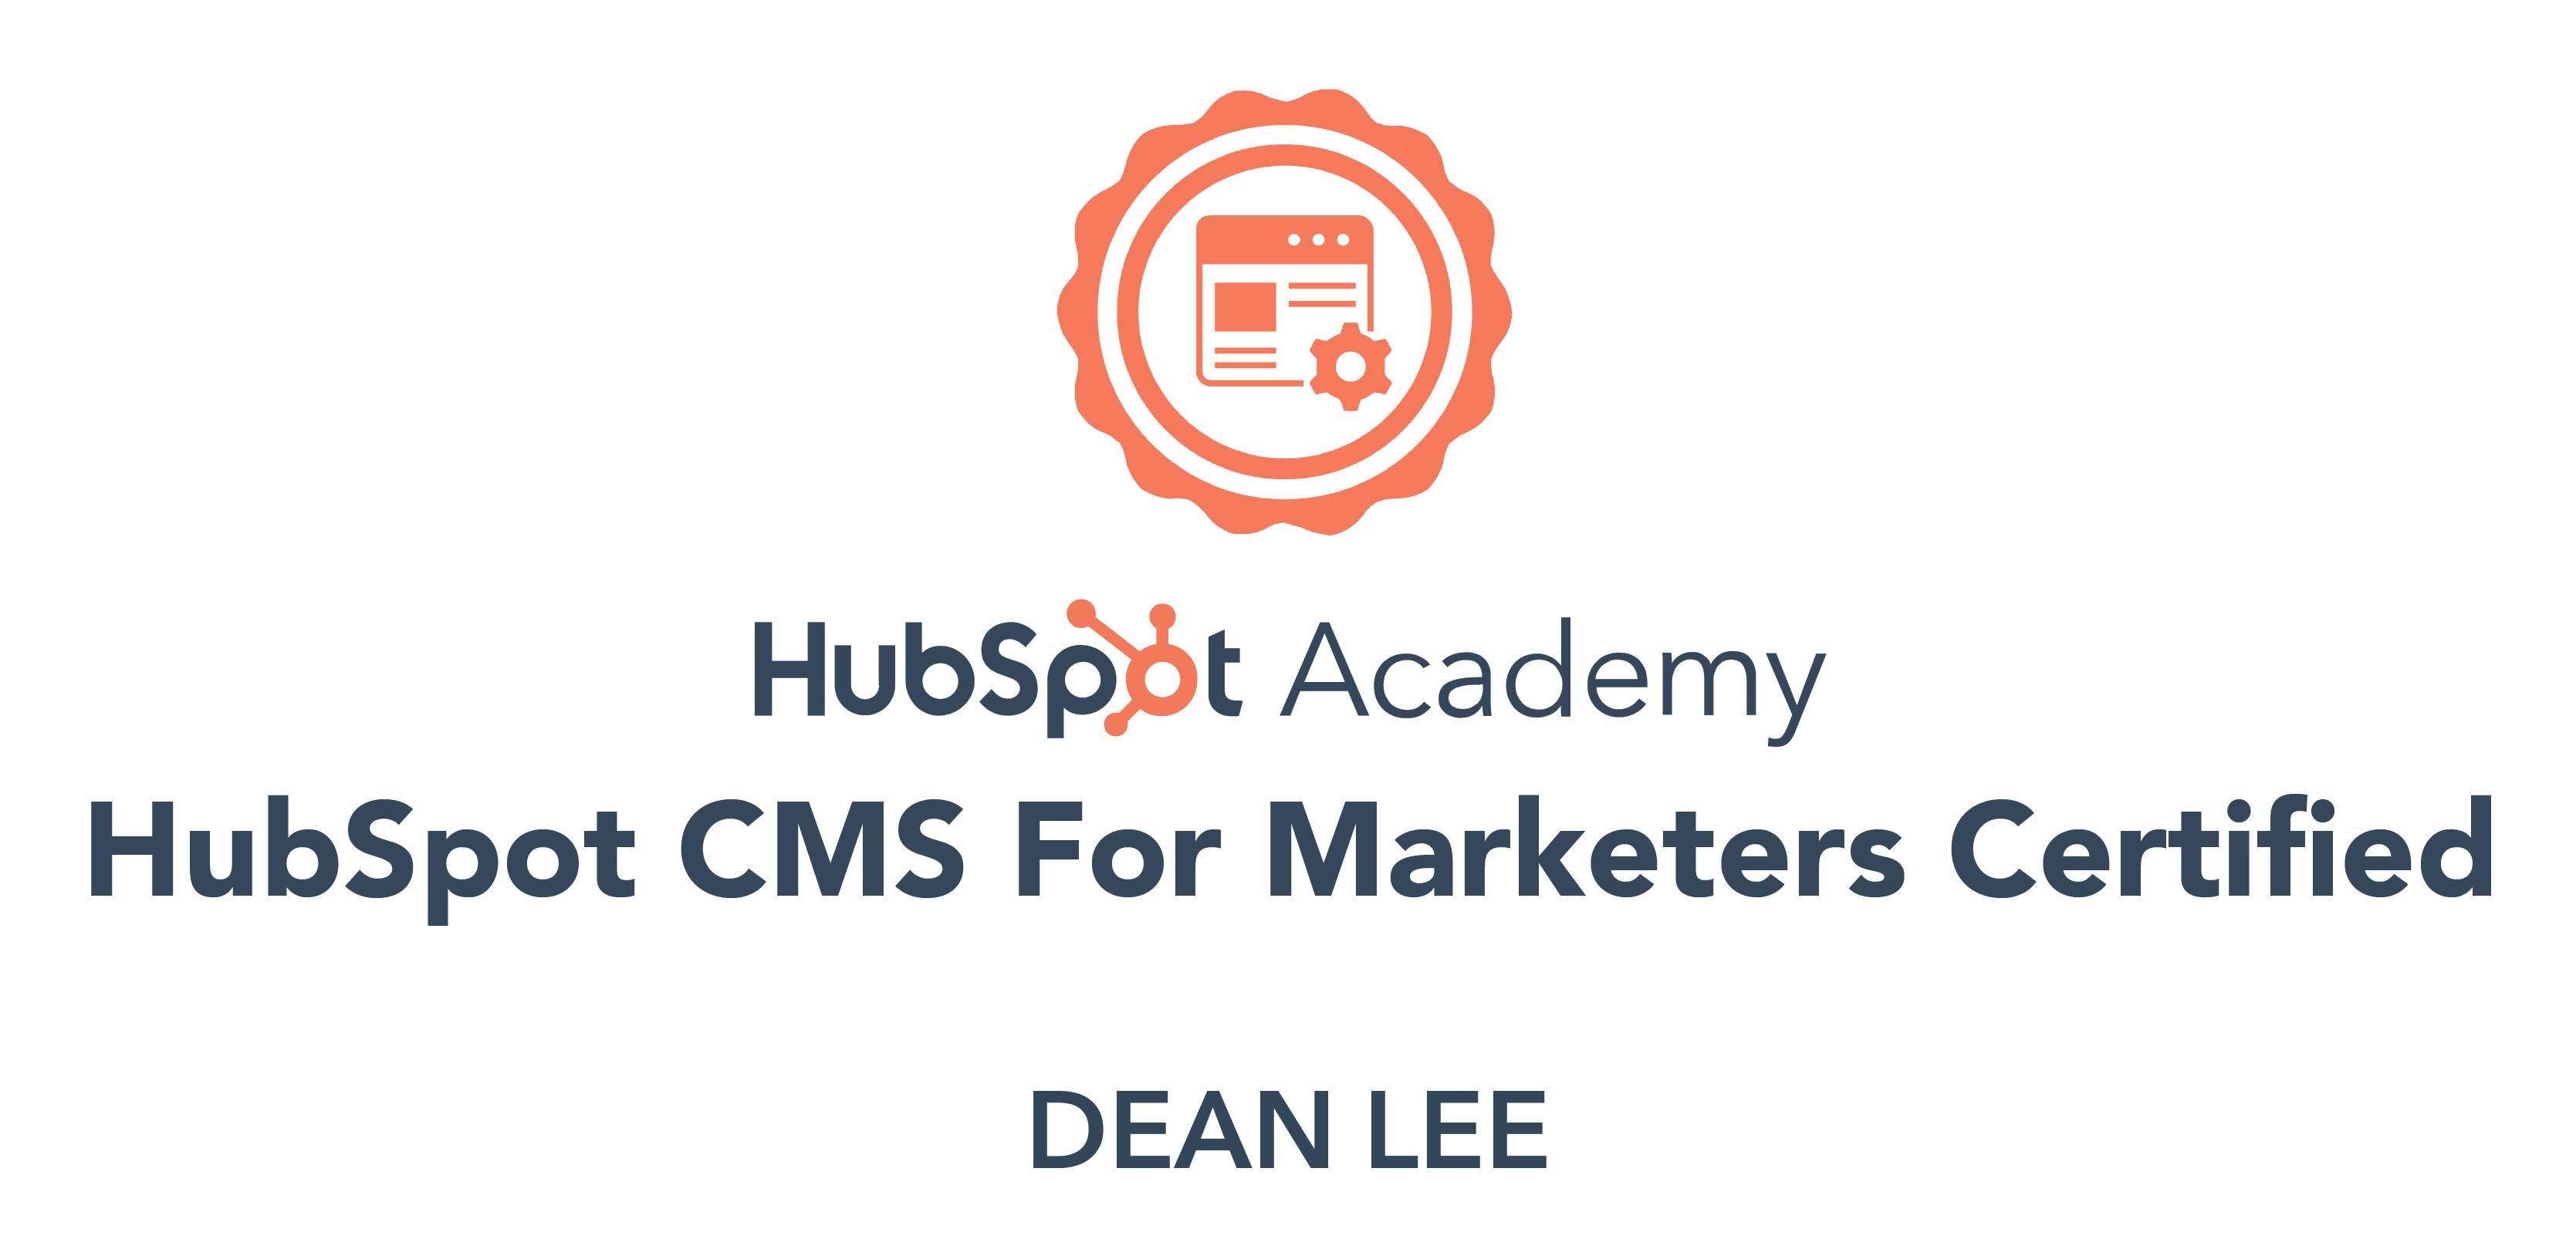 HubSpot CMS For Marketers Certified